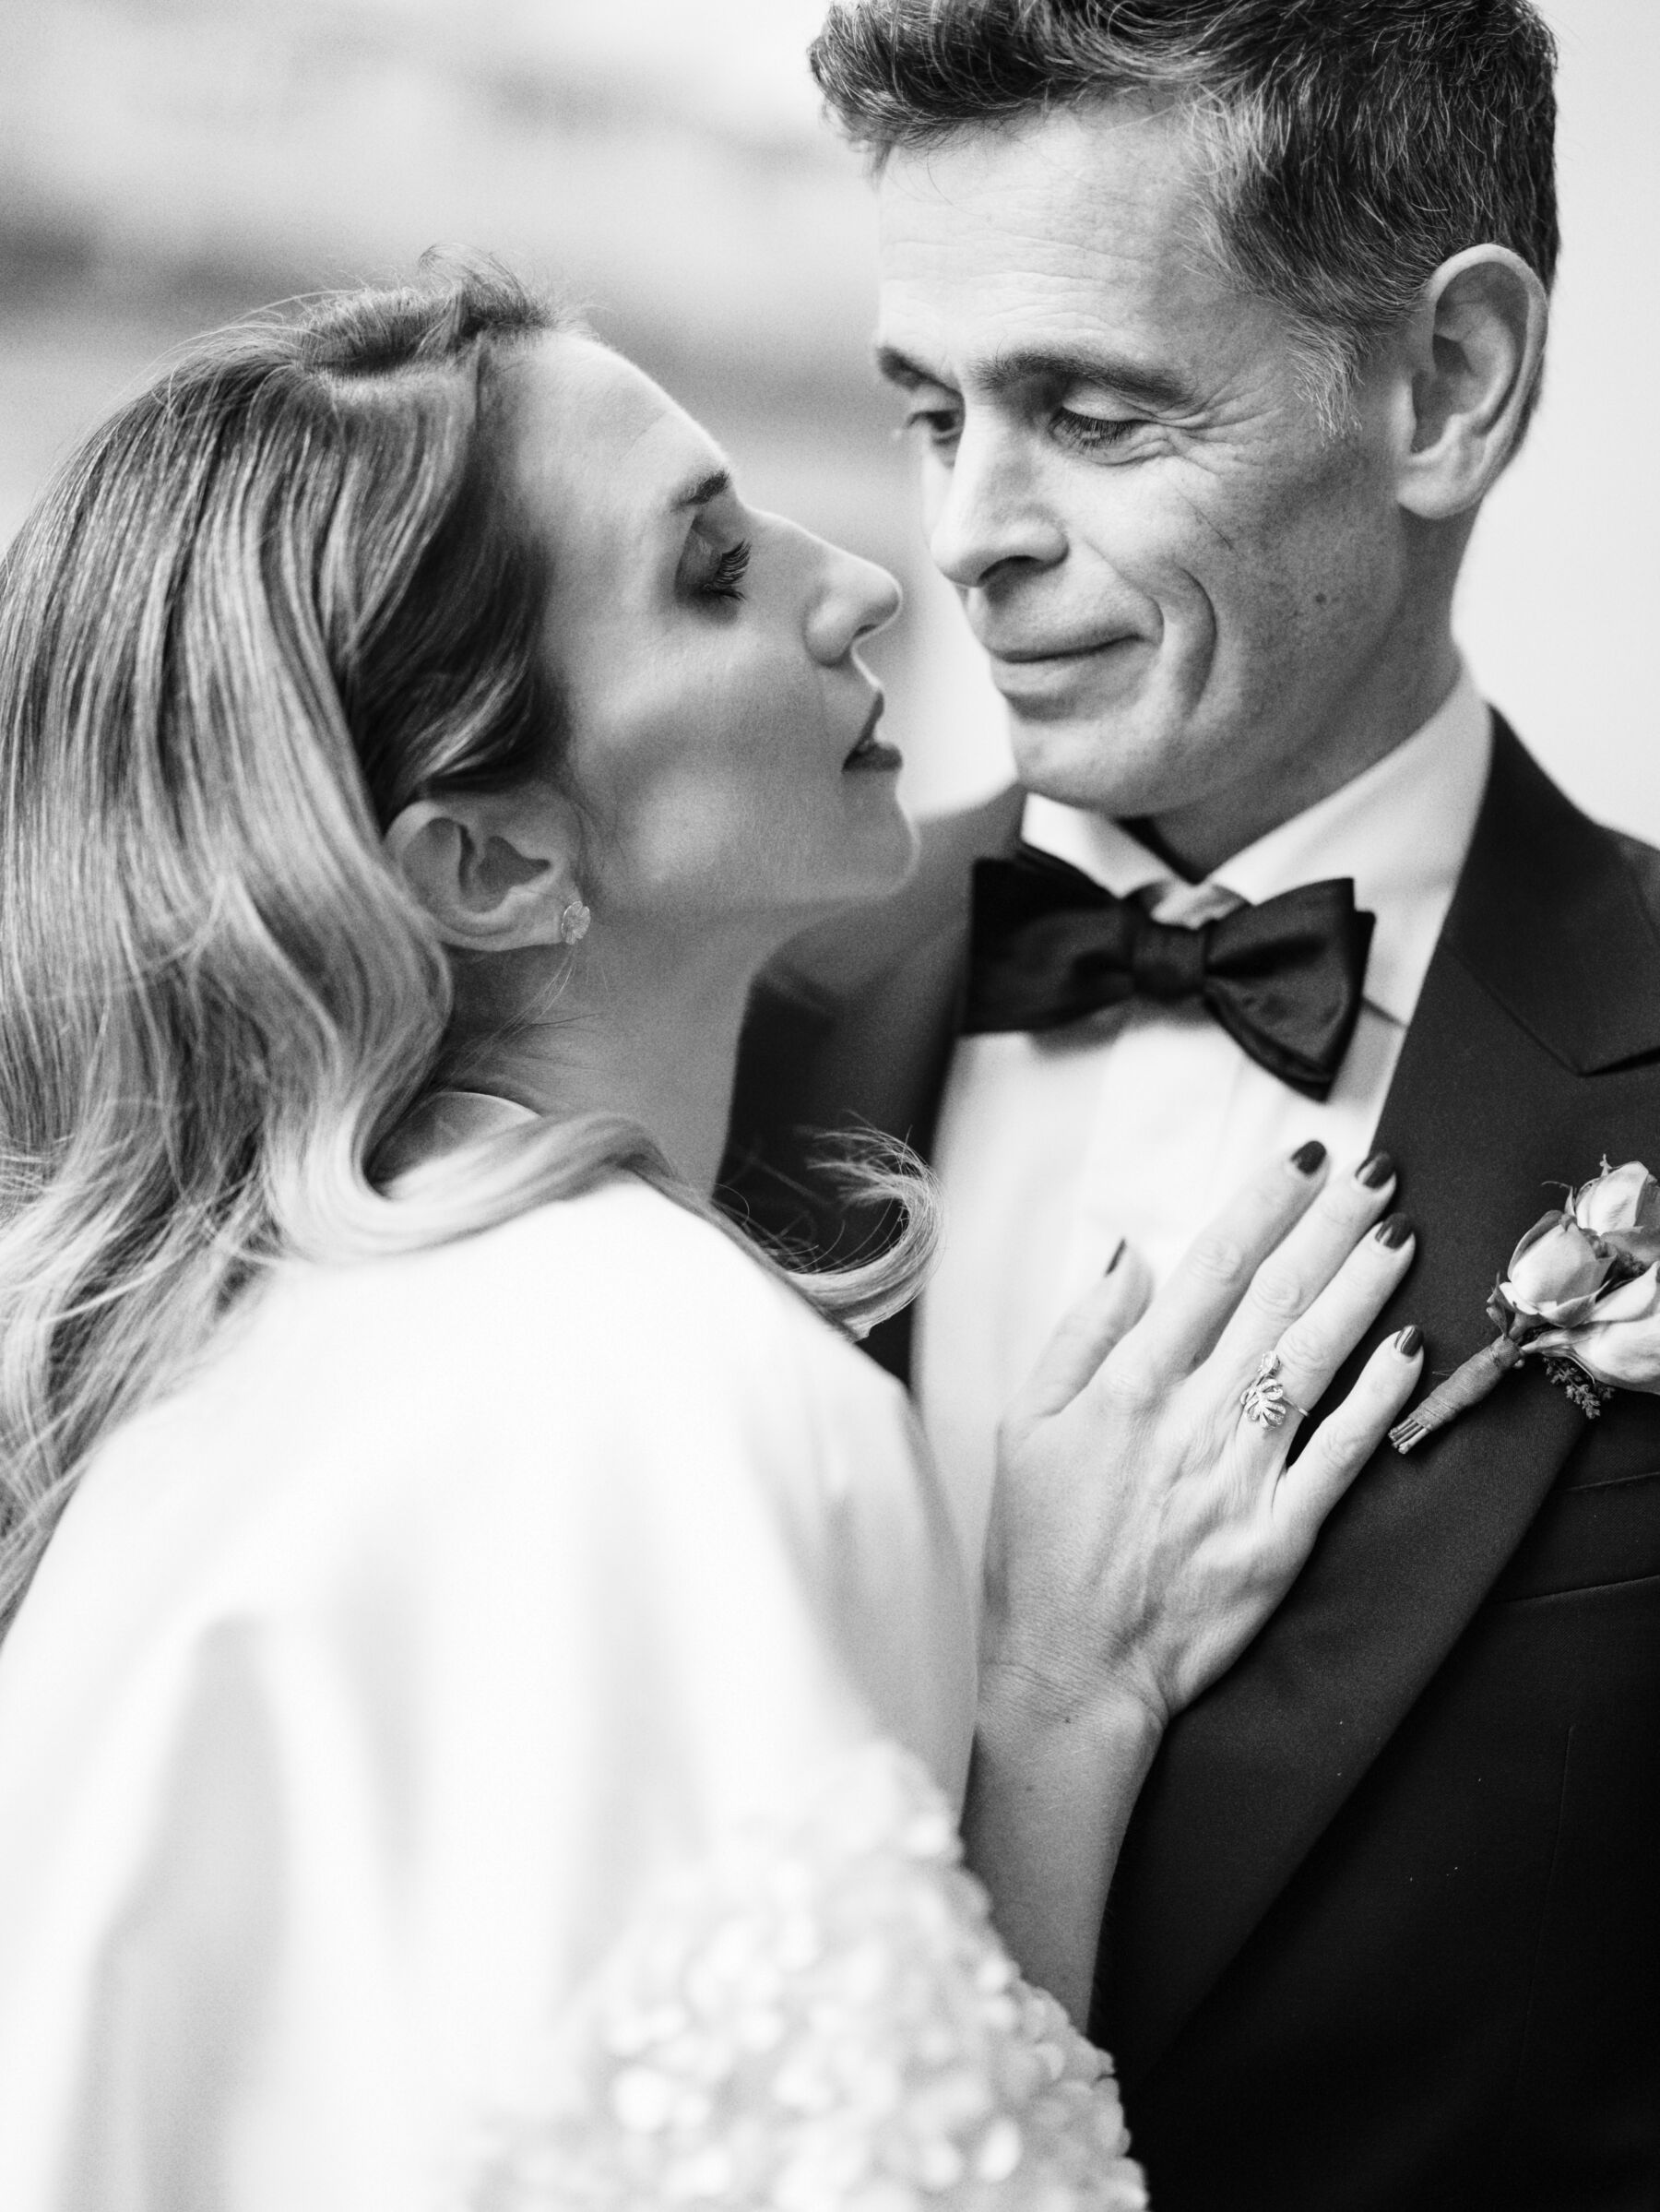 Classy black and white image of bride and groom in romantic embrace, inspired by Peter Lindbergh. Kernwell Photography.